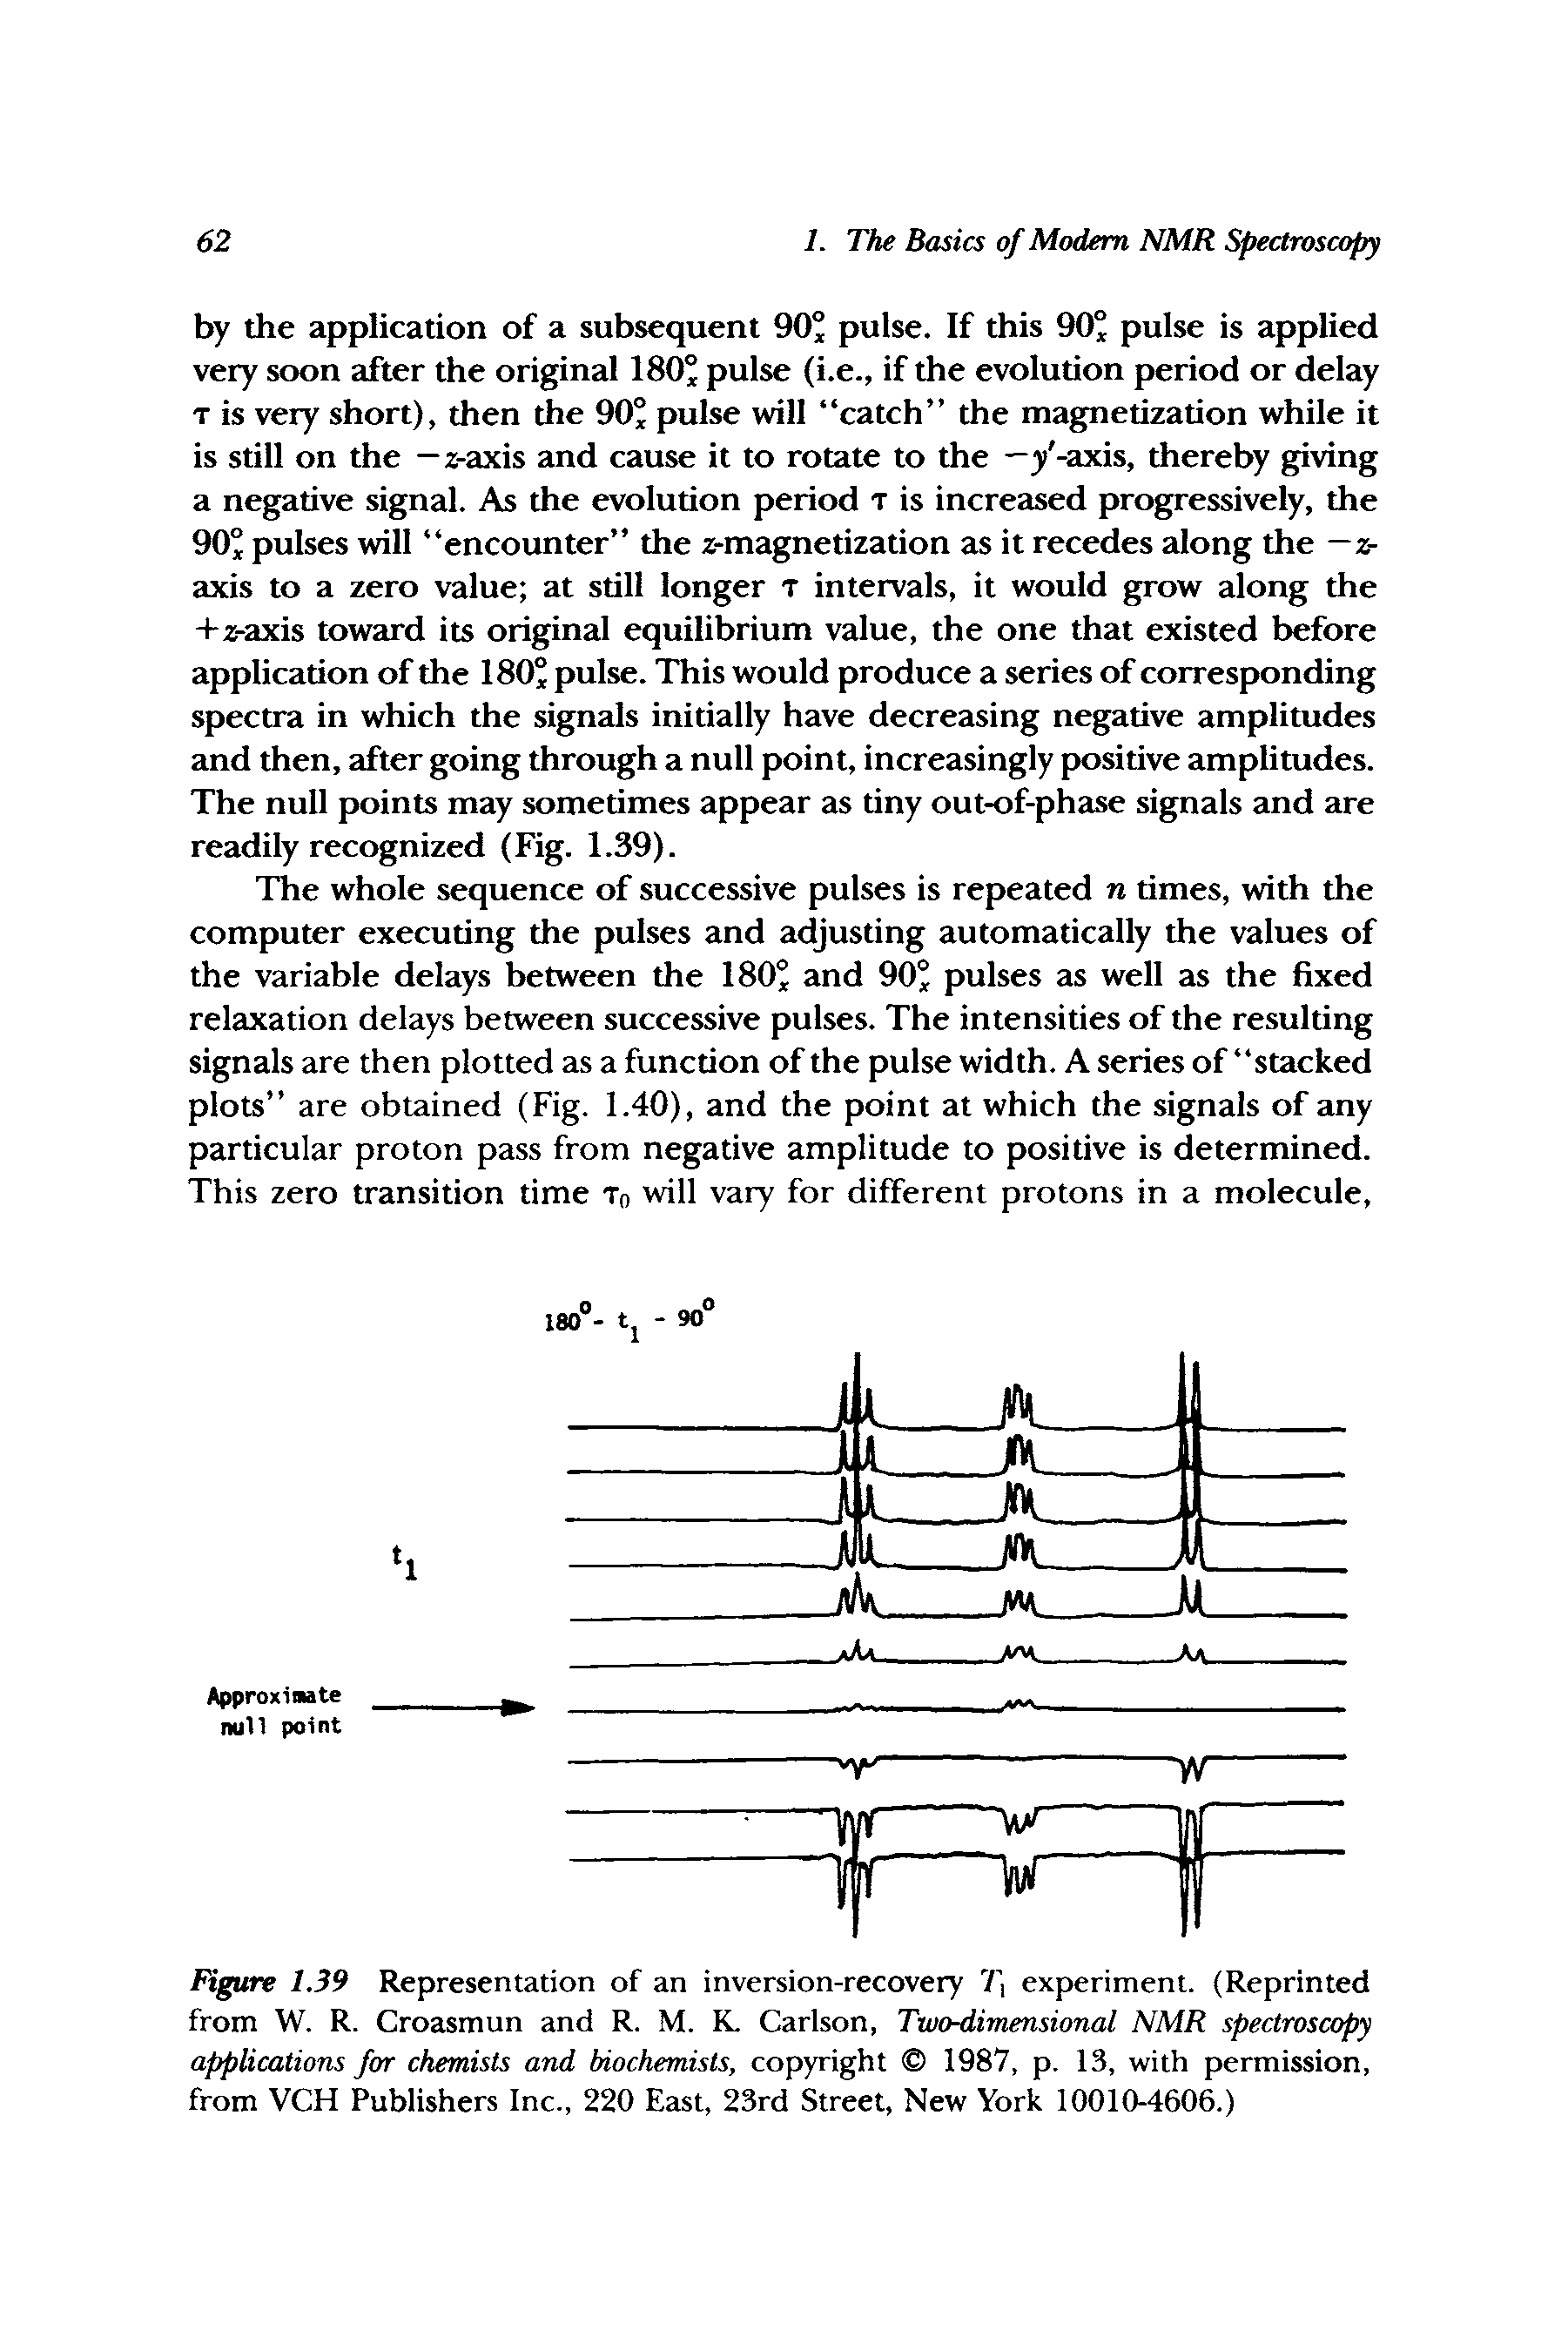 Figure 1.39 Representation of an inversion-recovery 7) experiment. (Reprinted from W. R. Croasmun and R. M. K. Carlson, Two-dimensional NMR spectroscopy applications for chemists and biochemists, copyright 1987, p. 13, with permission, from VCH Publishers Inc., 220 East, 23rd Street, New York 10010-4606.)...